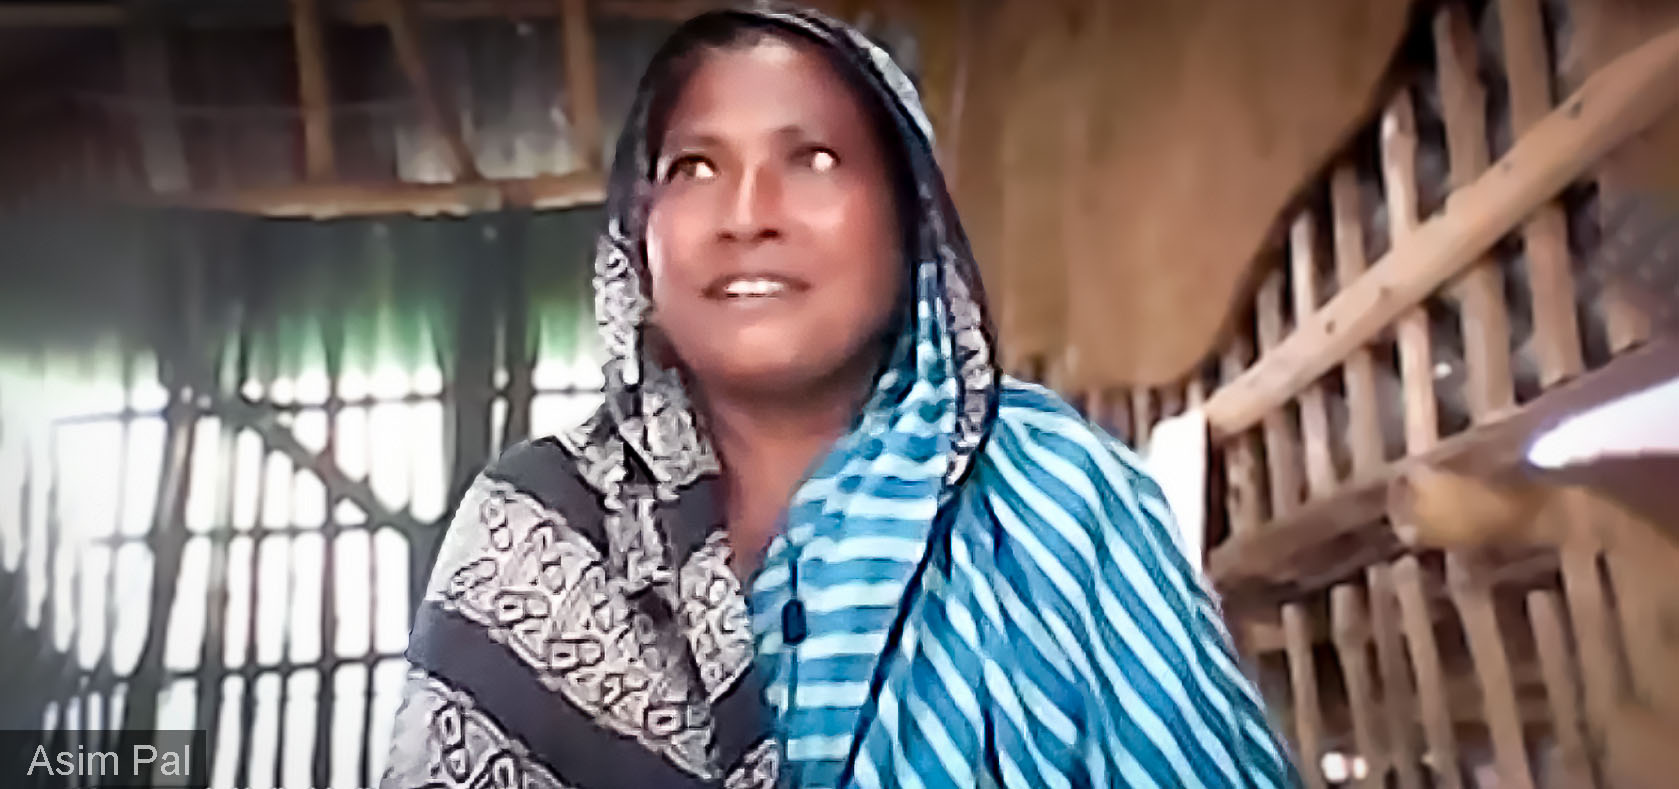 Reti Khatun, in Kulpala village, Bangladesh, speaks during a 30 May video meeting with representatives of the Government of Sweden and UN Women, which have helped farmers like her find economic security amid the country’s volatile weather. Screenshot: UN Women